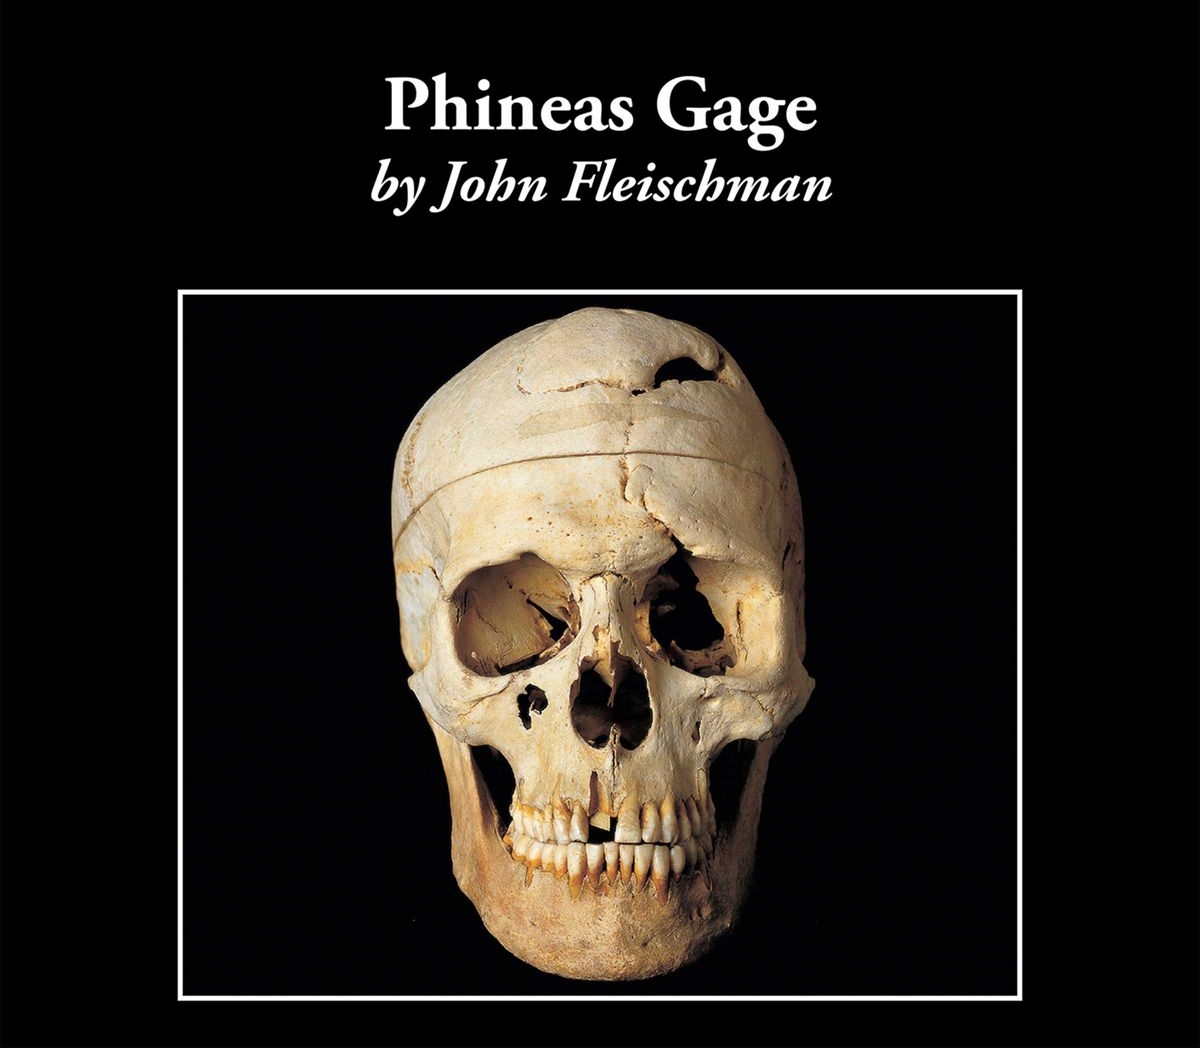 Phineas Gage [ A Gruesome But True Story About Brain Science ] ( book ) ... John Fleischman